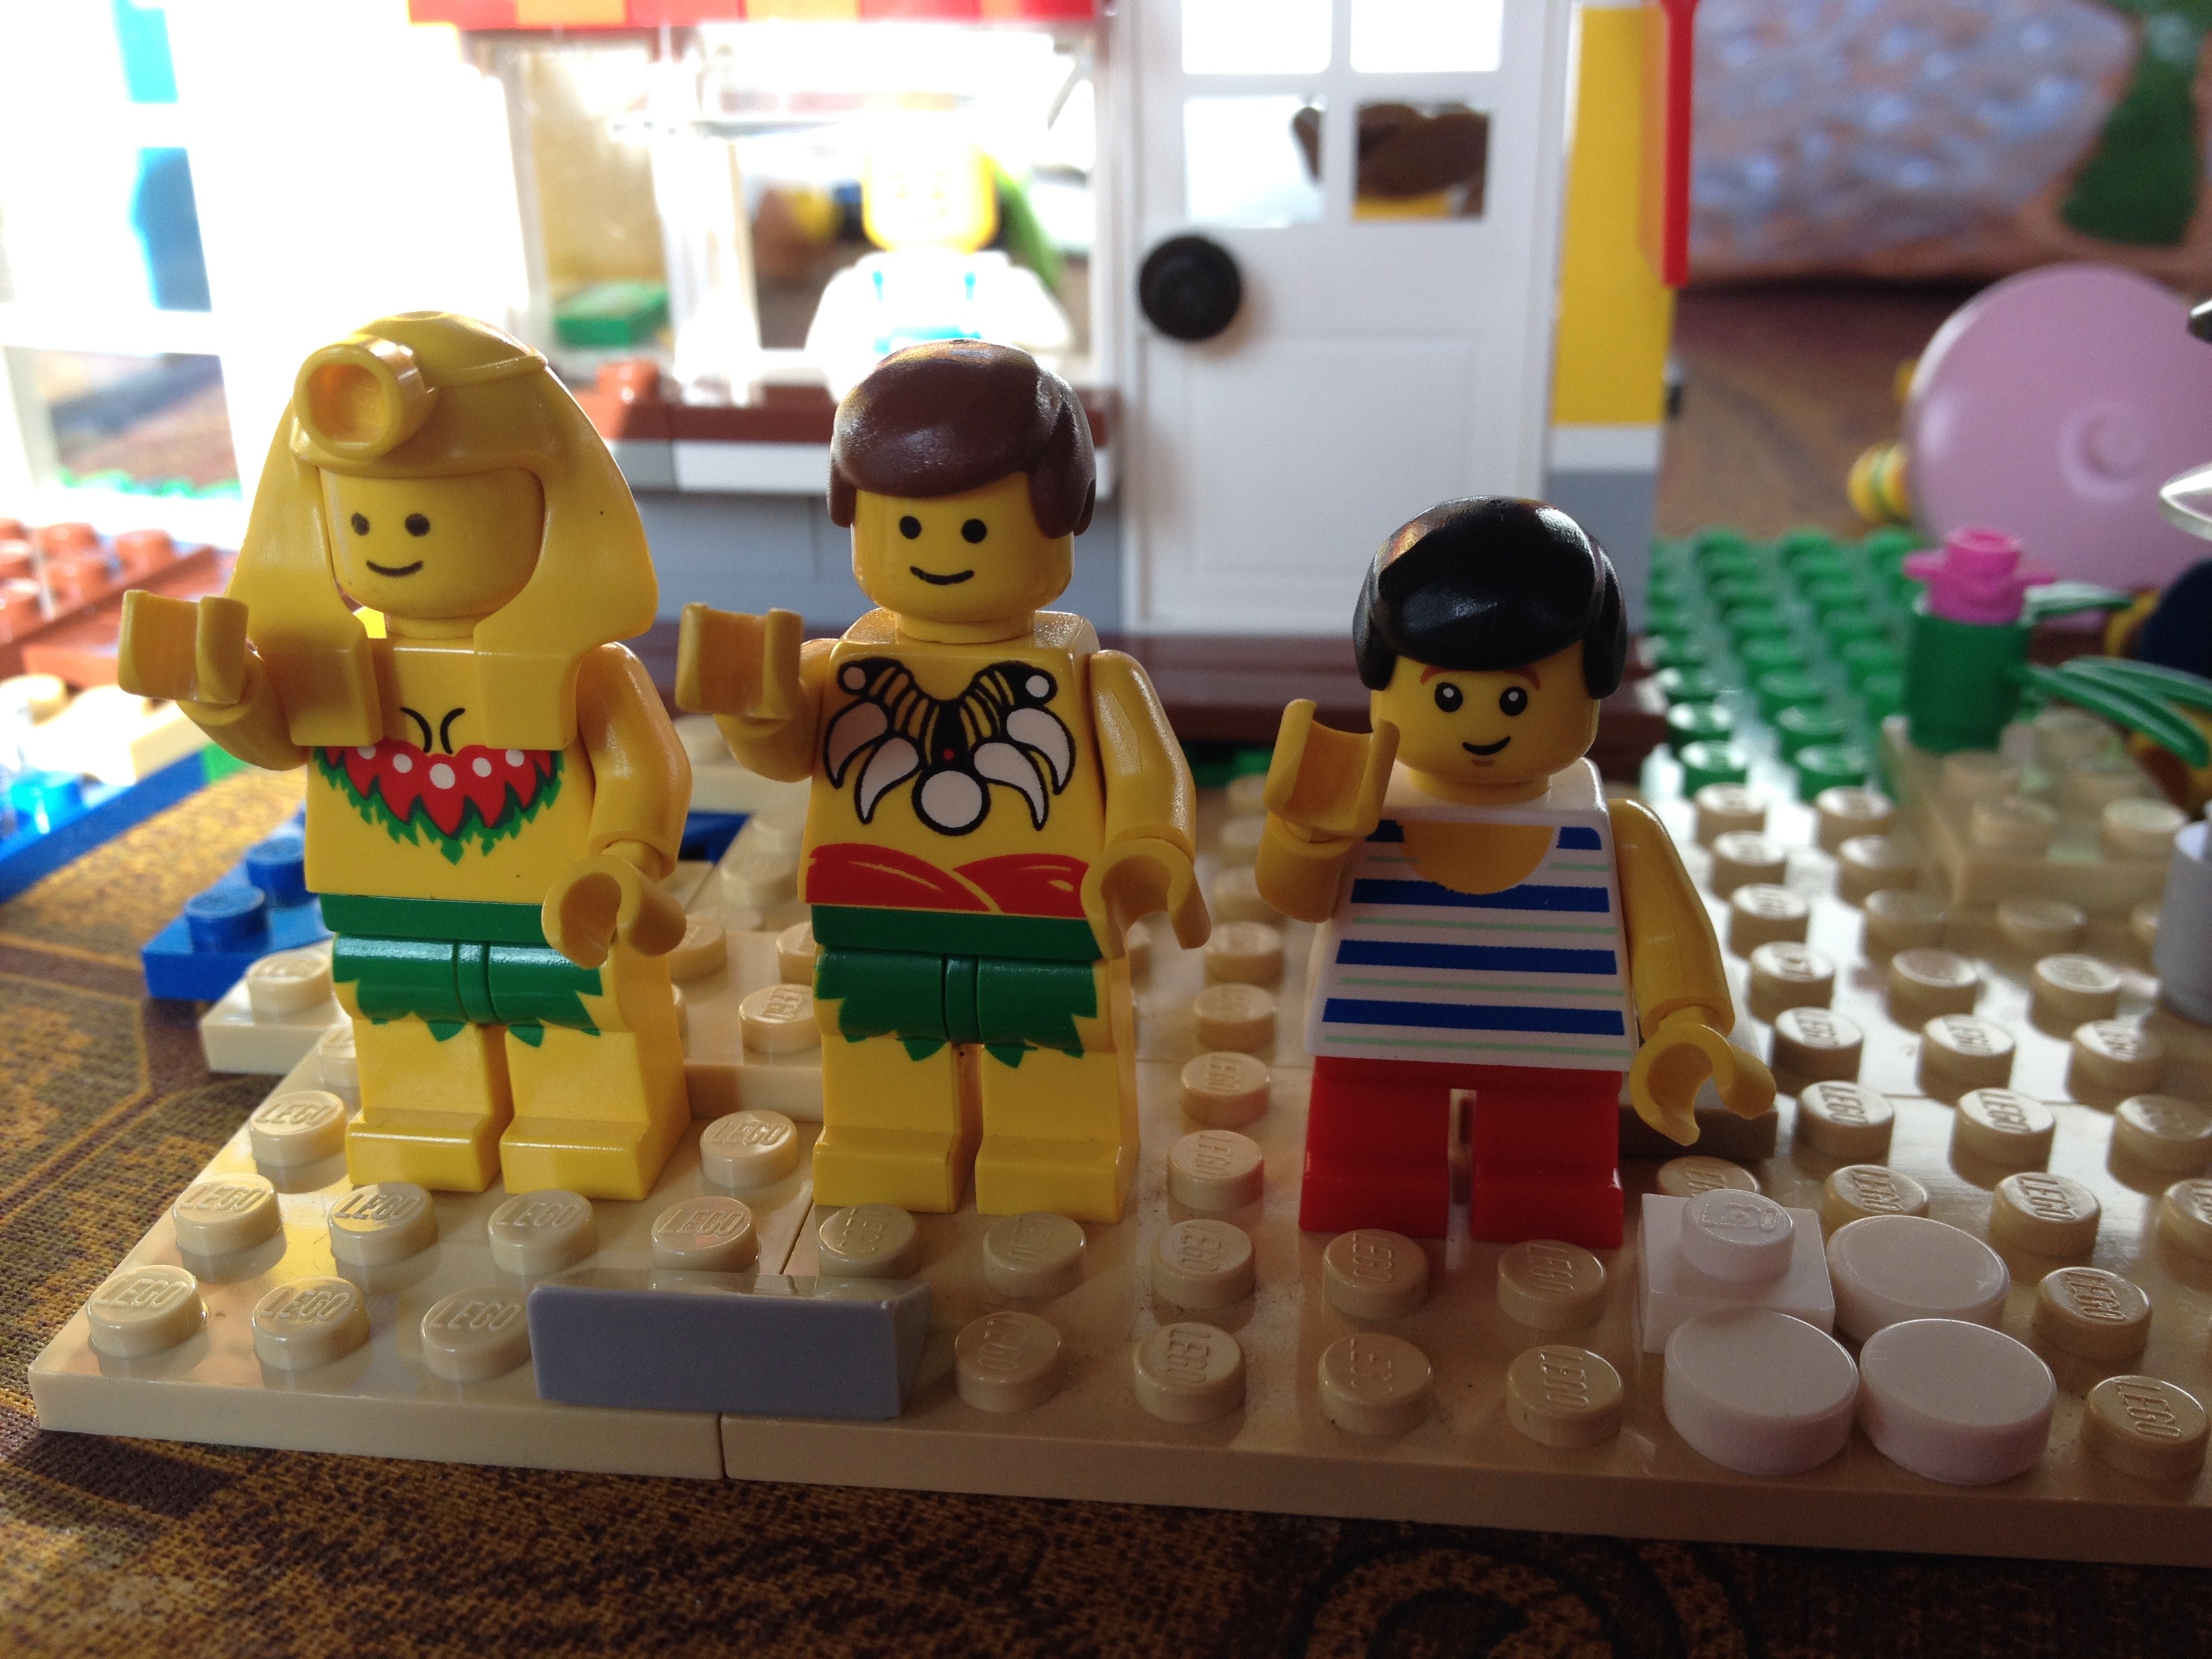 A lego boy is doing a dance with 2 lego people is hula costumes.